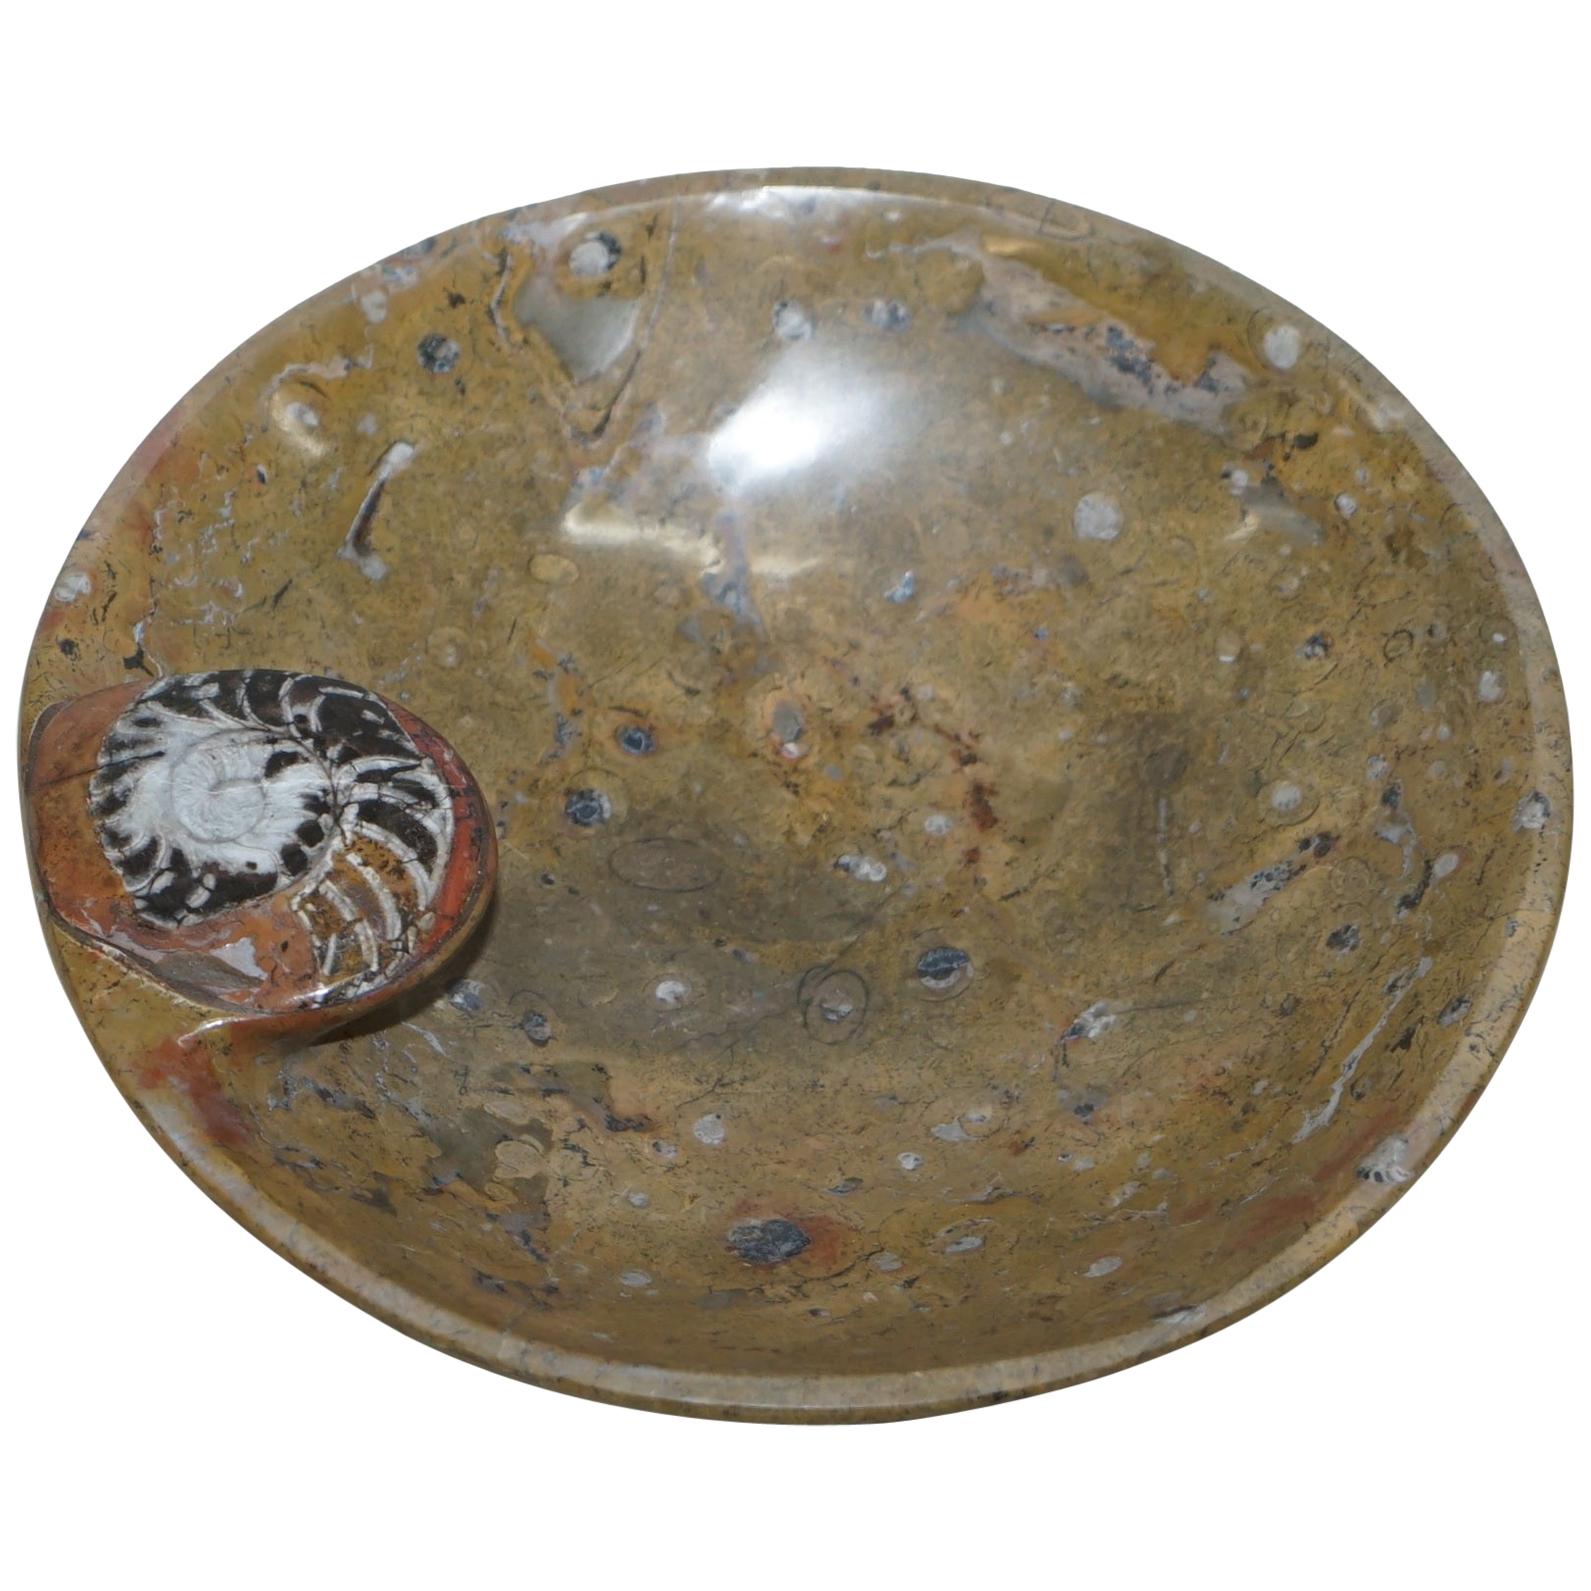 1 of 4 Sublime Moroccan Ammonite Atlas Mountains Fossil Bowls Marble Finish